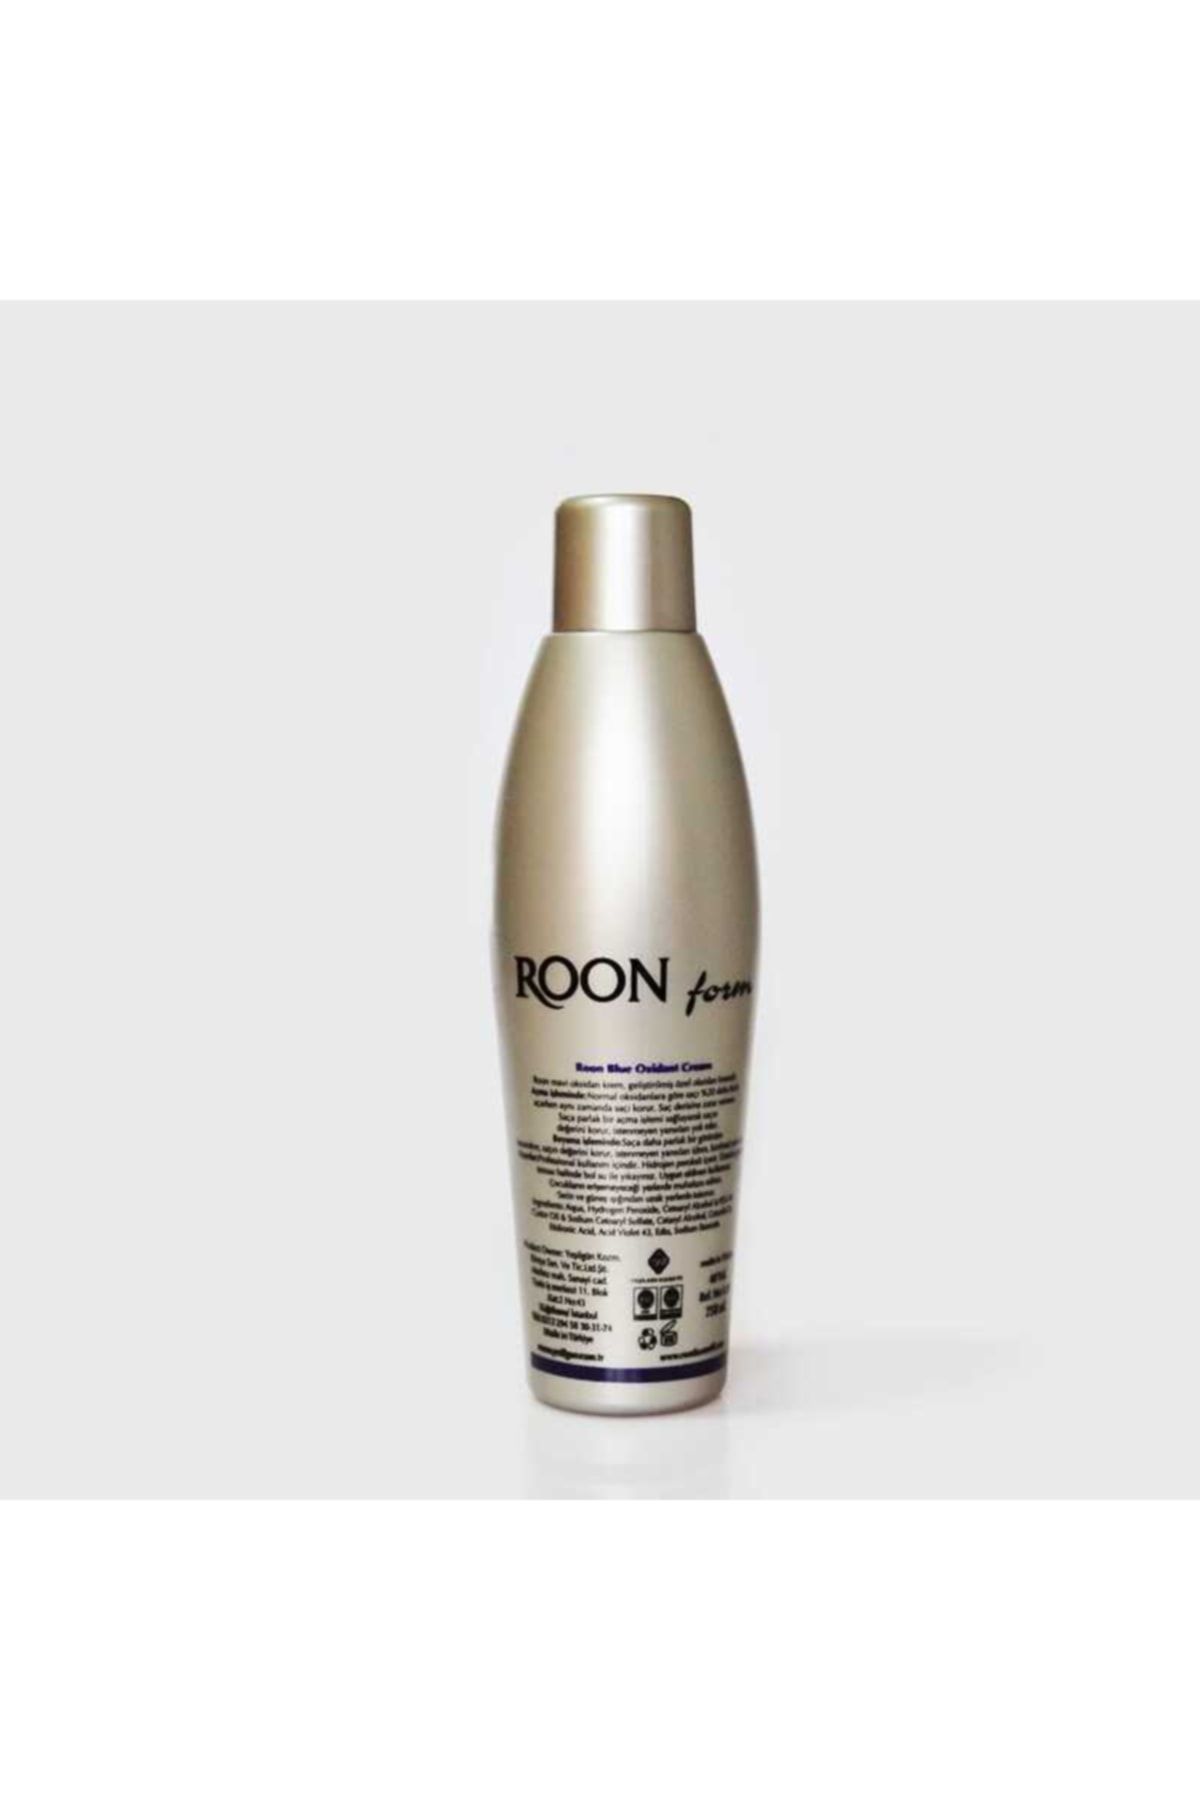 Roon Form Blue Oxy 40 Vol 750 ml